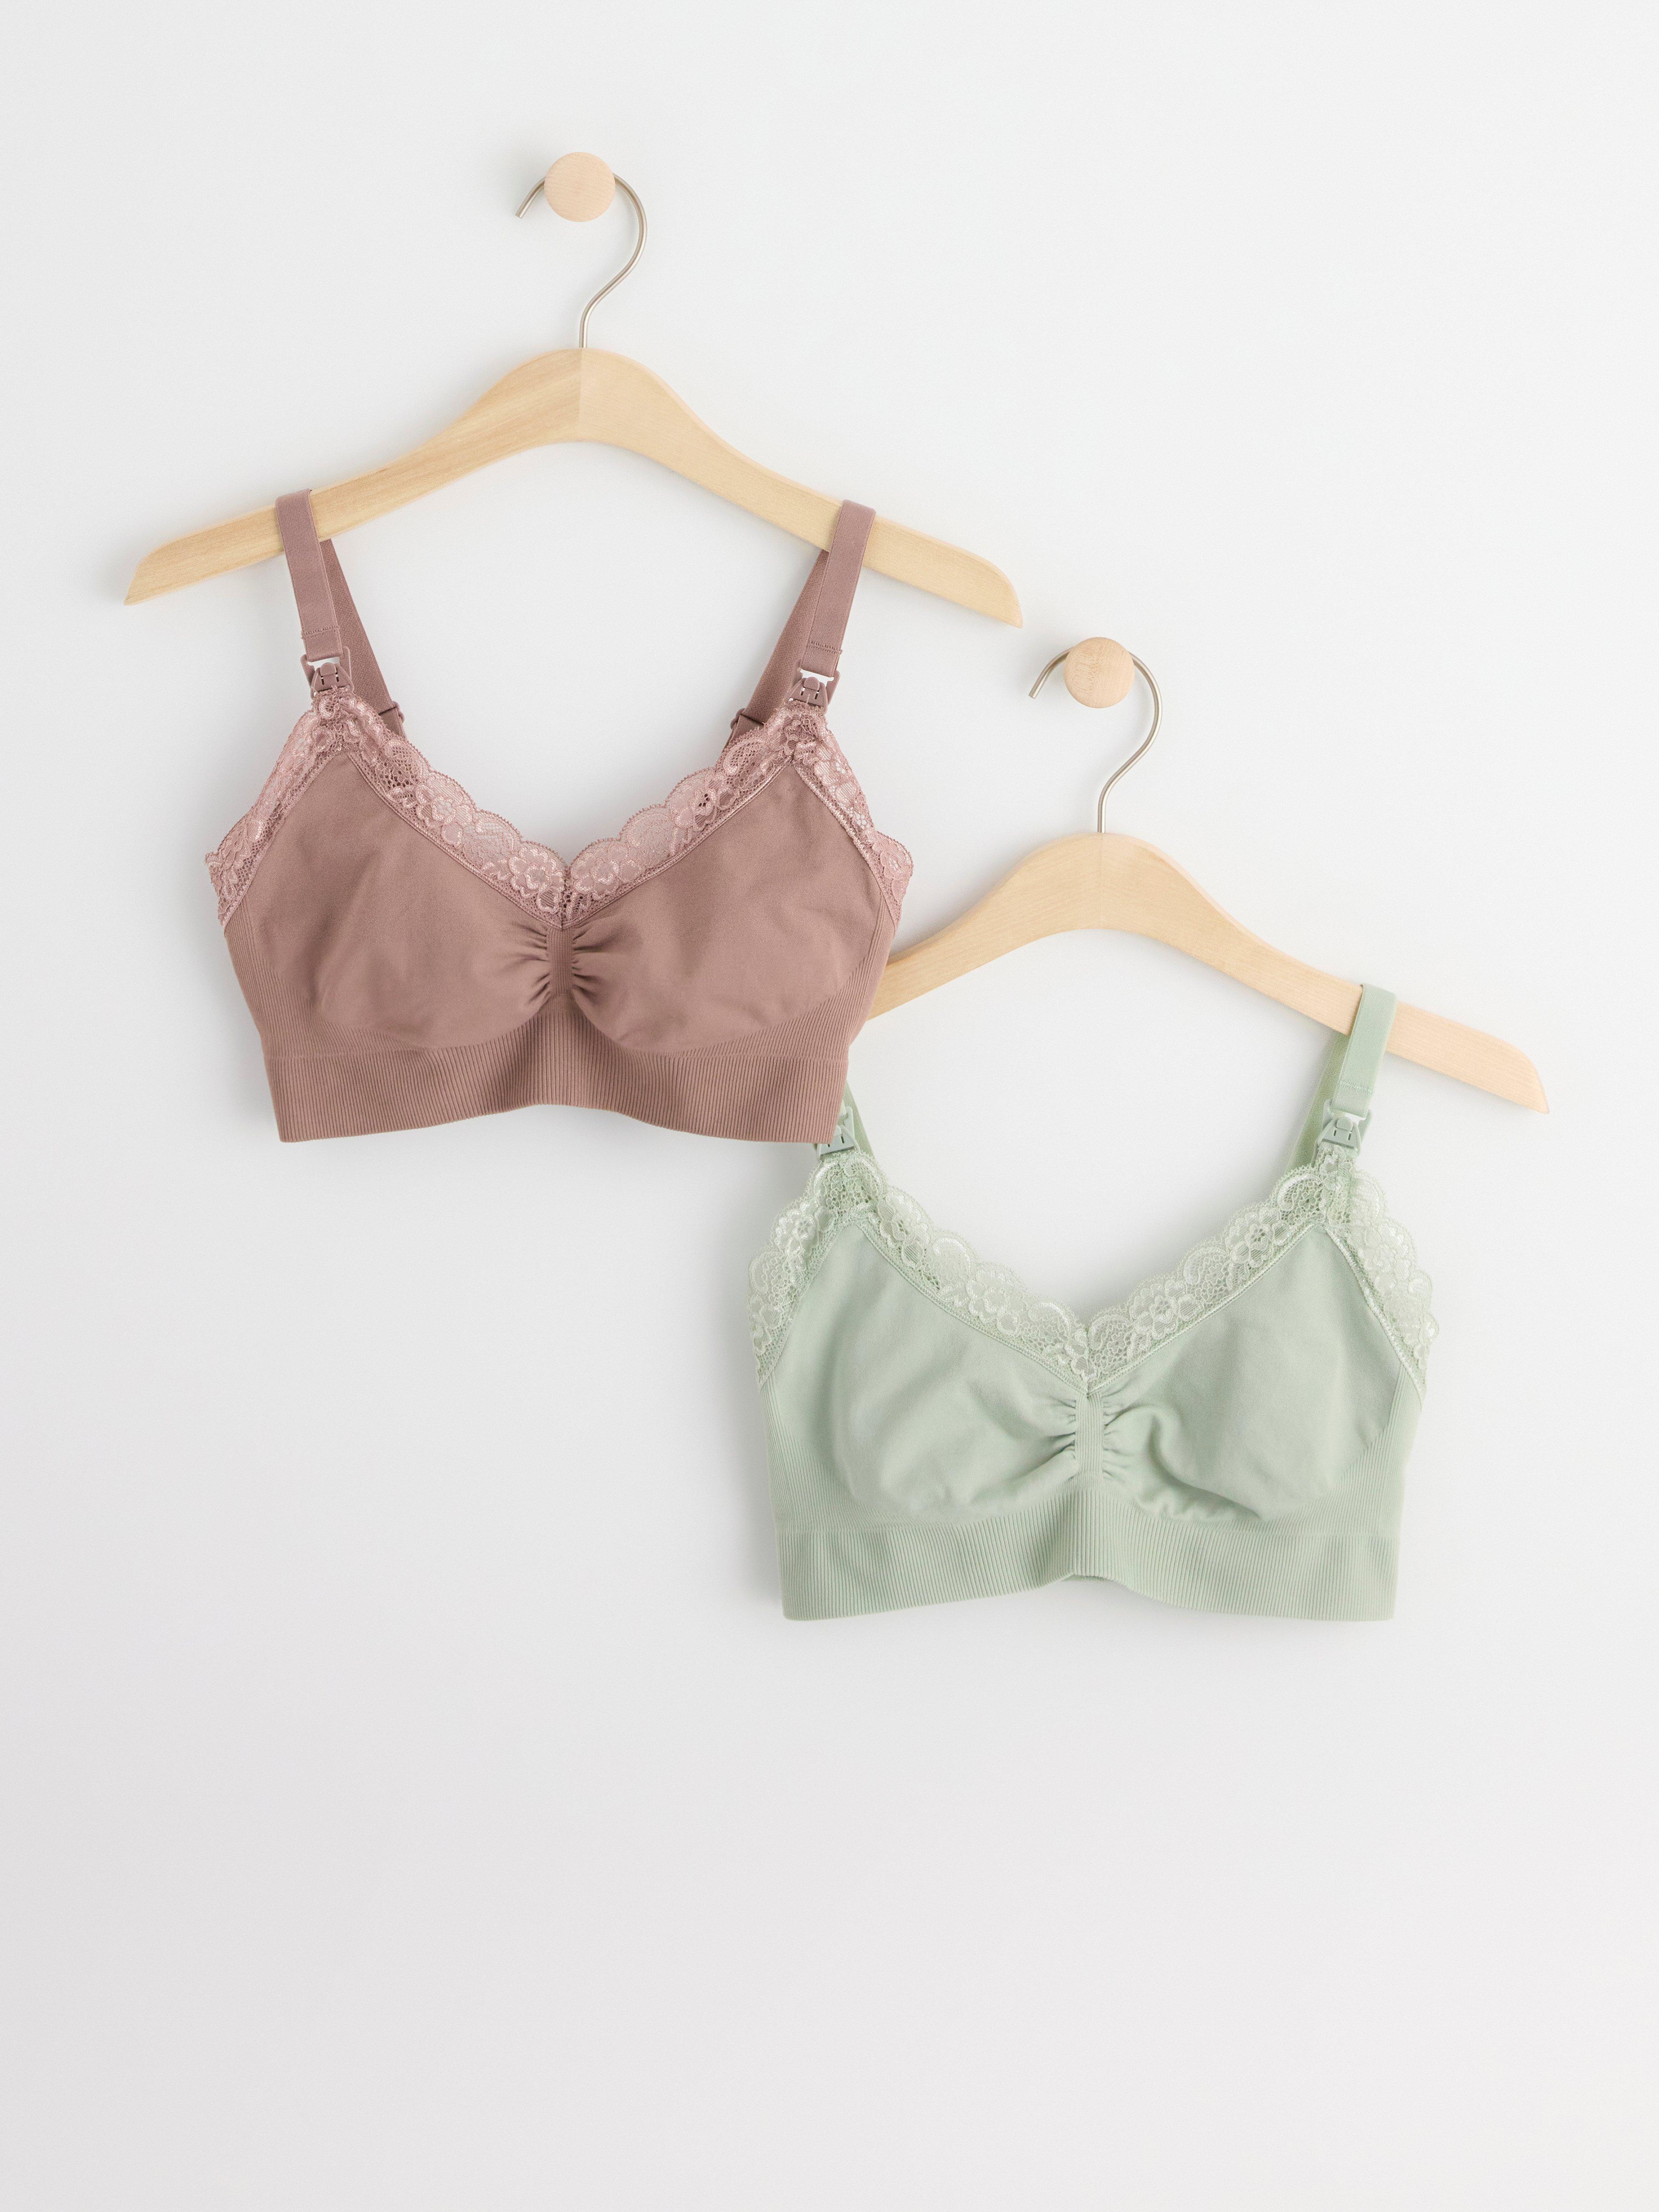 Lindex - We are here for you when you're busy being a hero. Our soft  nursing bras will make life a little easier during this precious time of  yours. #Lindex Shop here